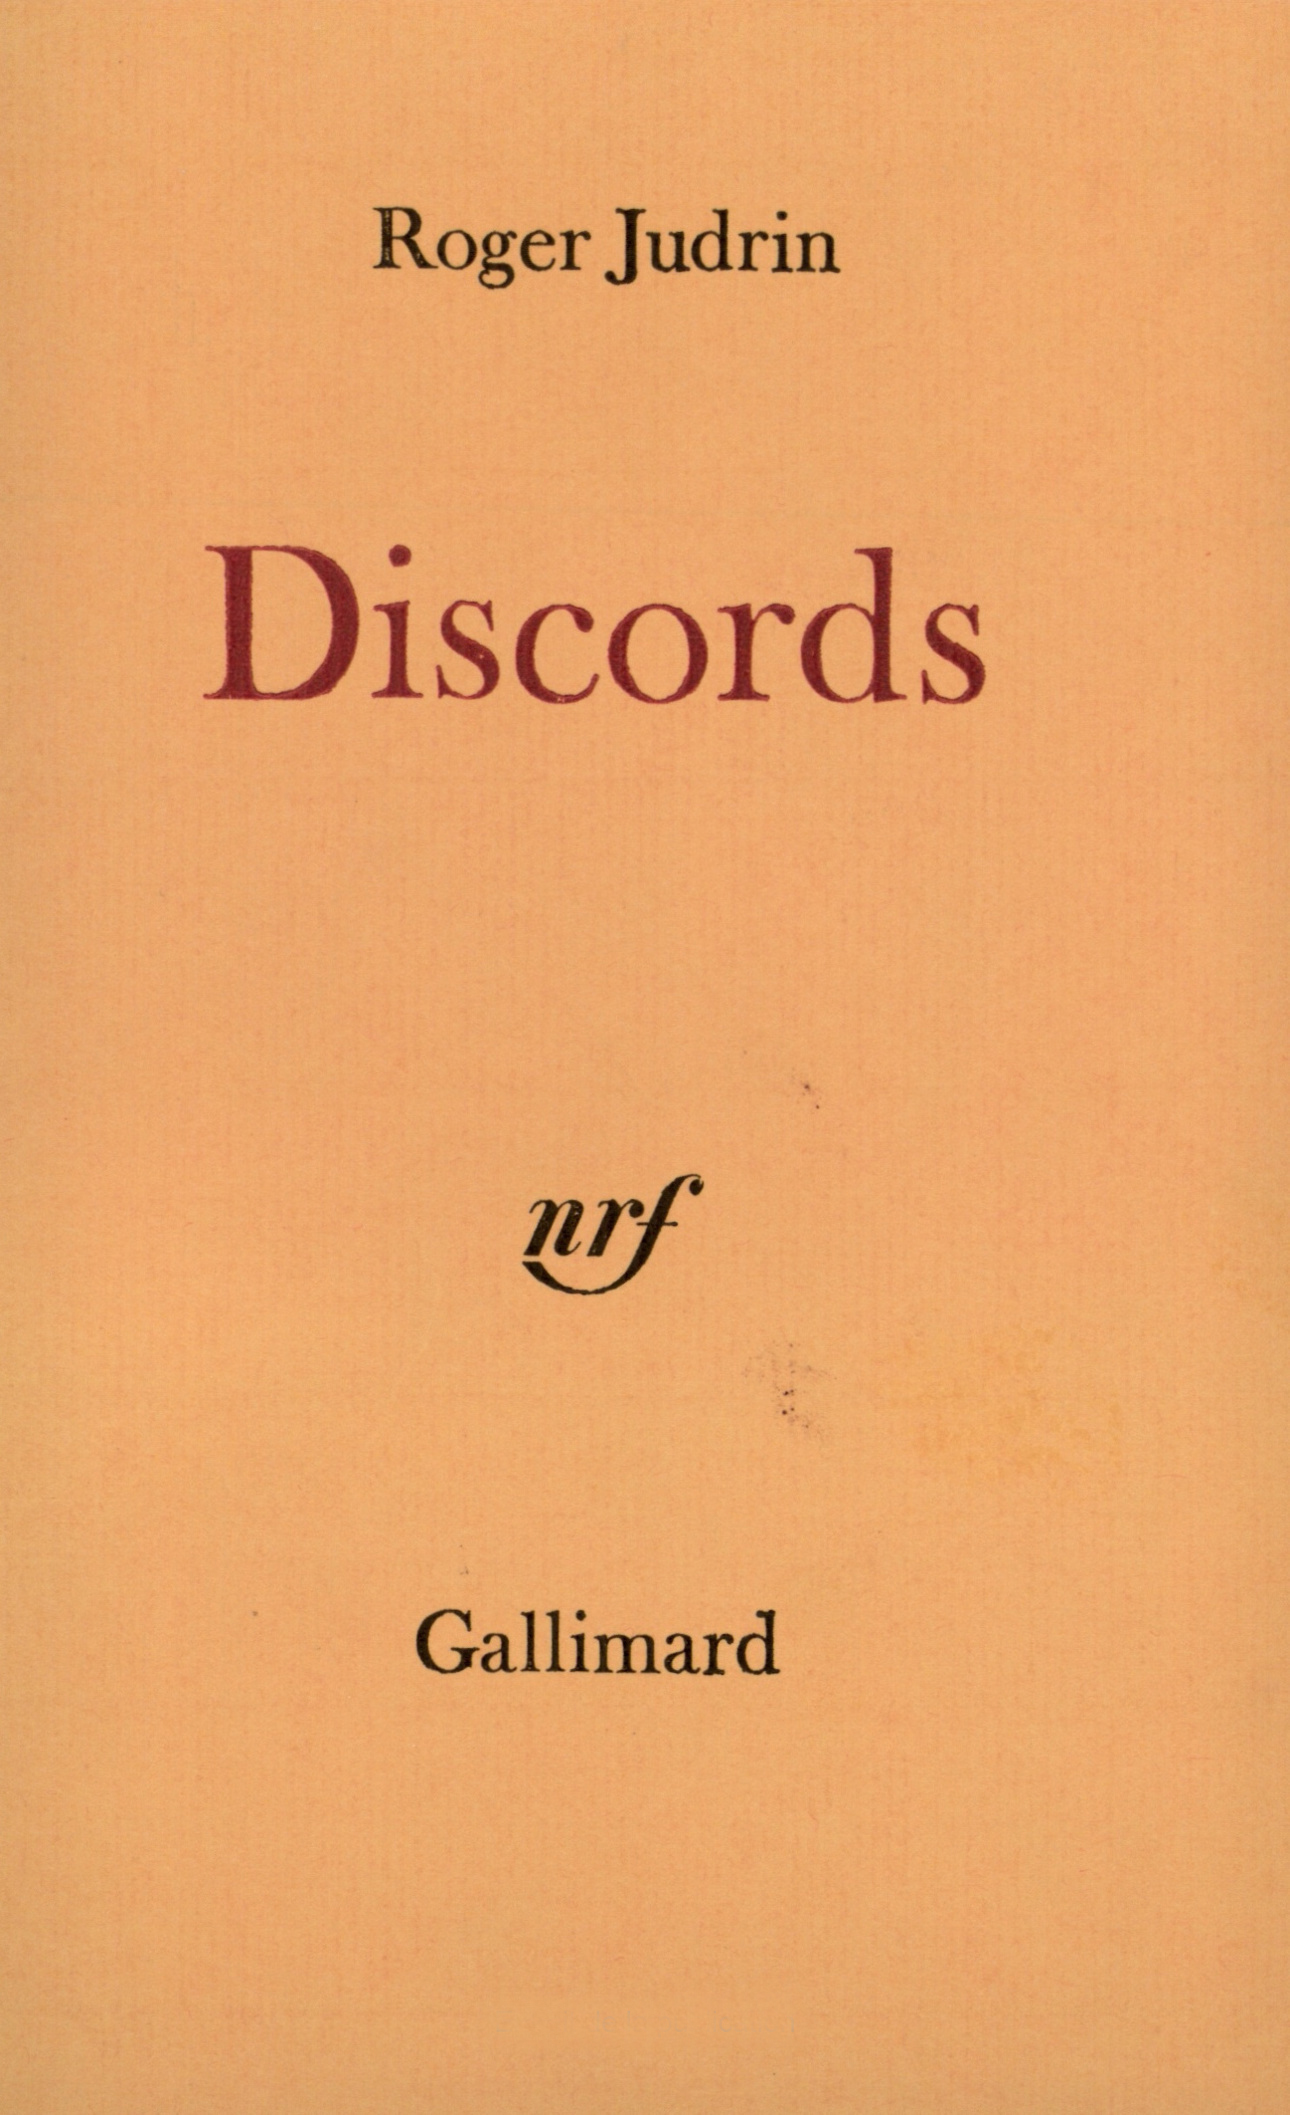 Discords (9782070107308-front-cover)